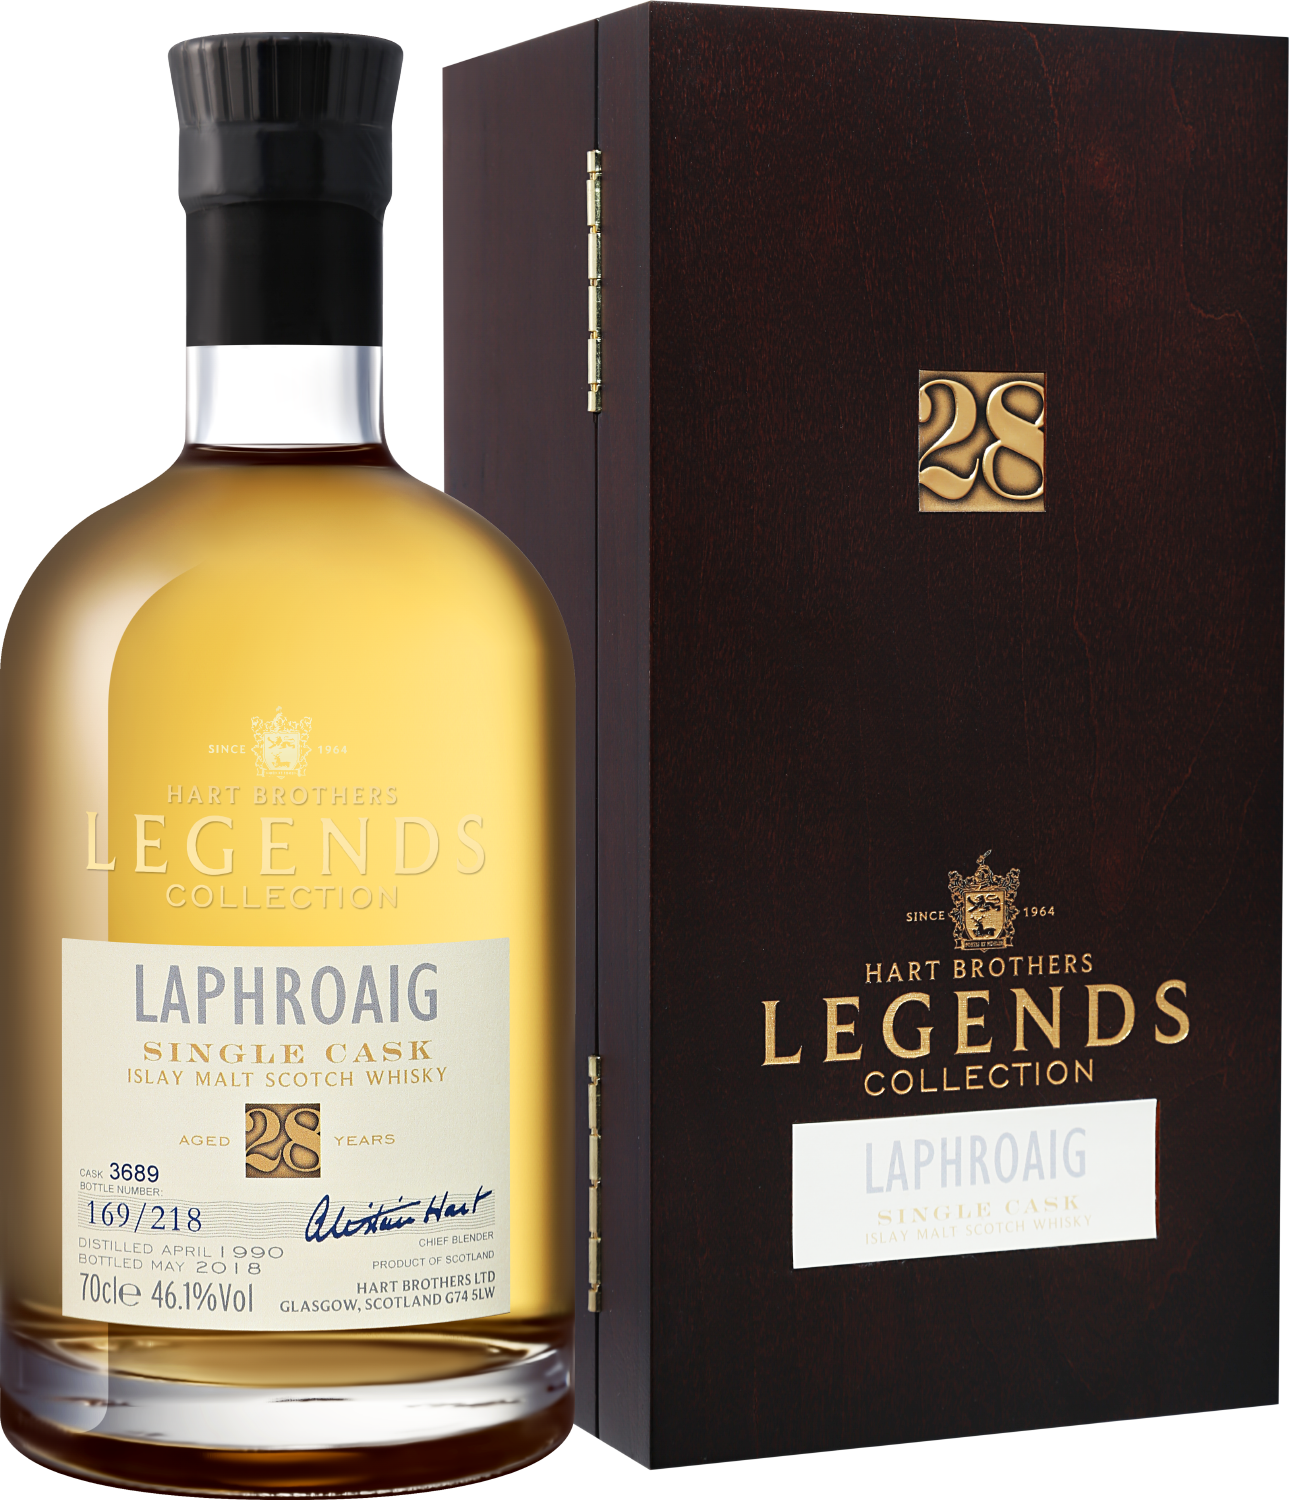 Hart Brothers Legends Collection Laphroaig Islay Single Cask Malt Scotch Whisky 28 y.o. (gift box) laphroaig select islay single malt scotch whisky gift box